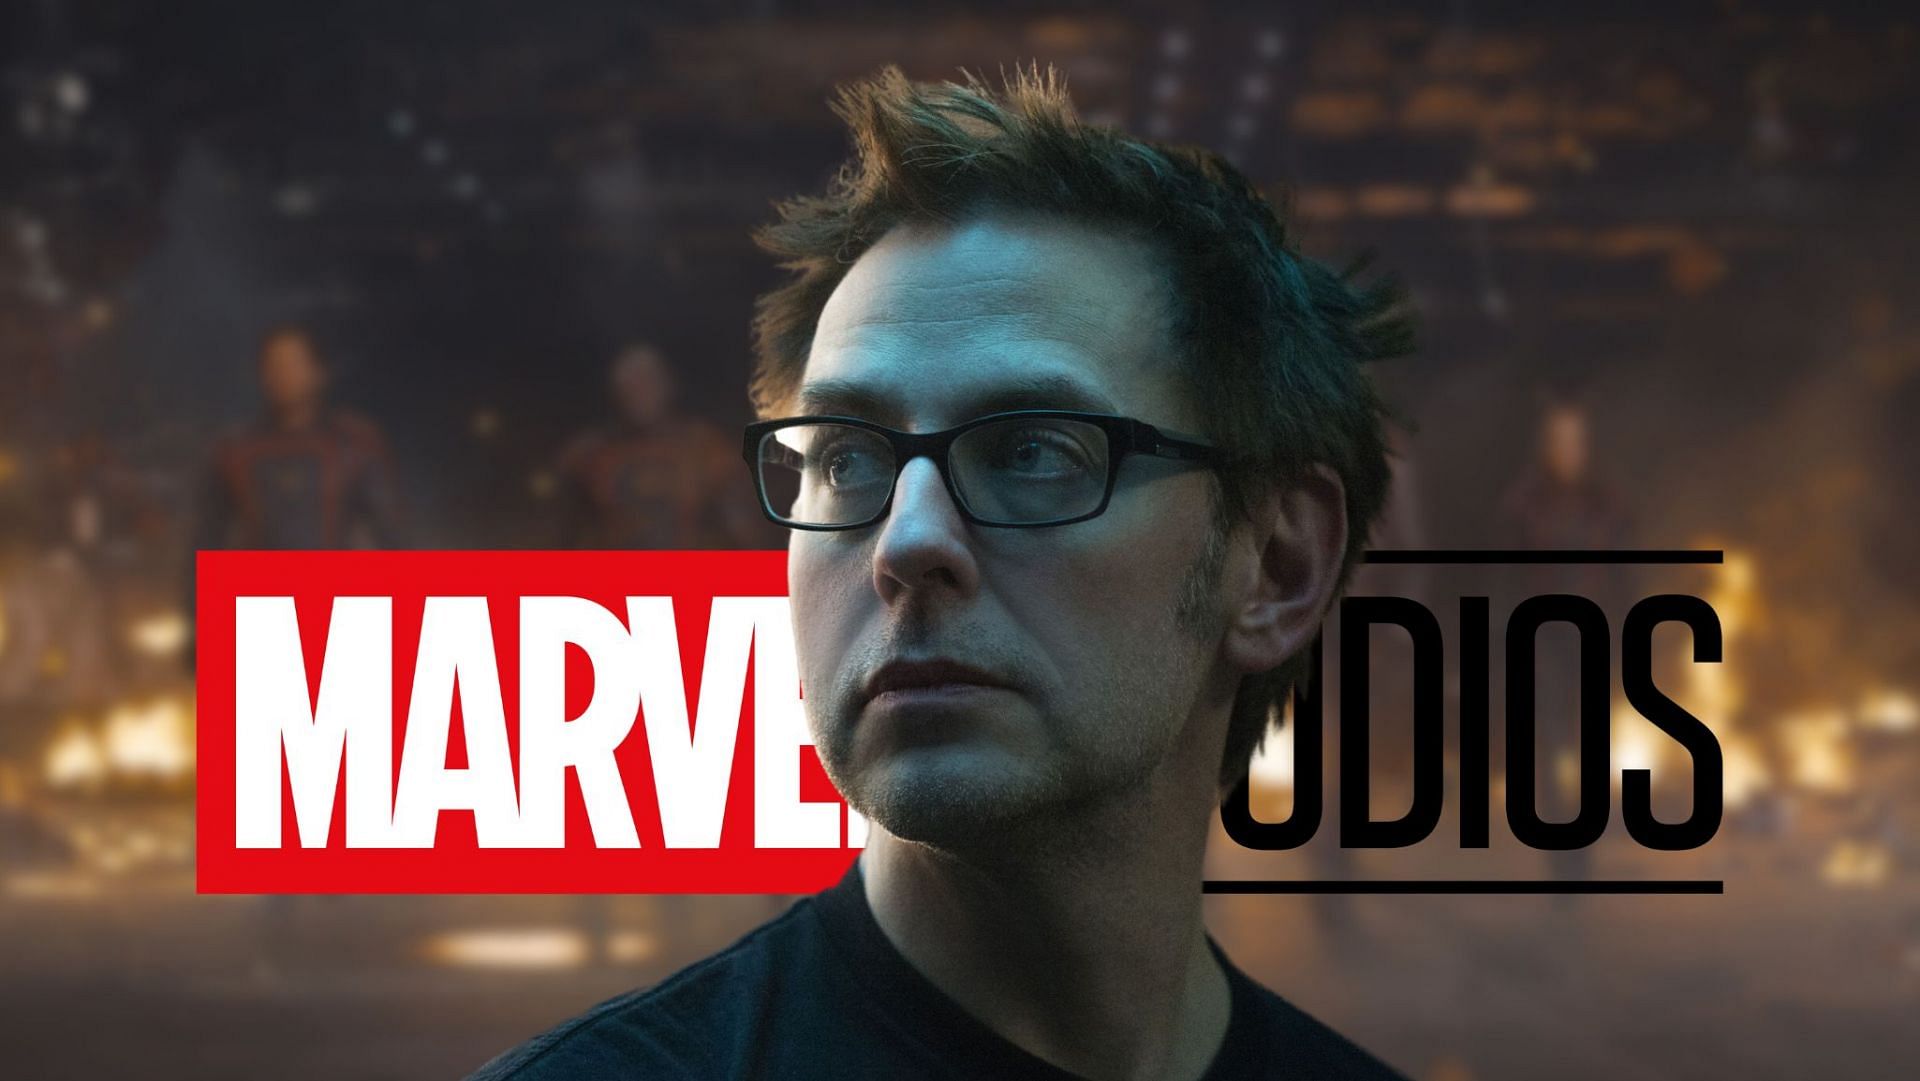 Director James Gunn sheds light on the highly anticipated digital release of Guardians of the Galaxy Vol. 3, keeping fans informed and excited (Image via Sportskeeda)